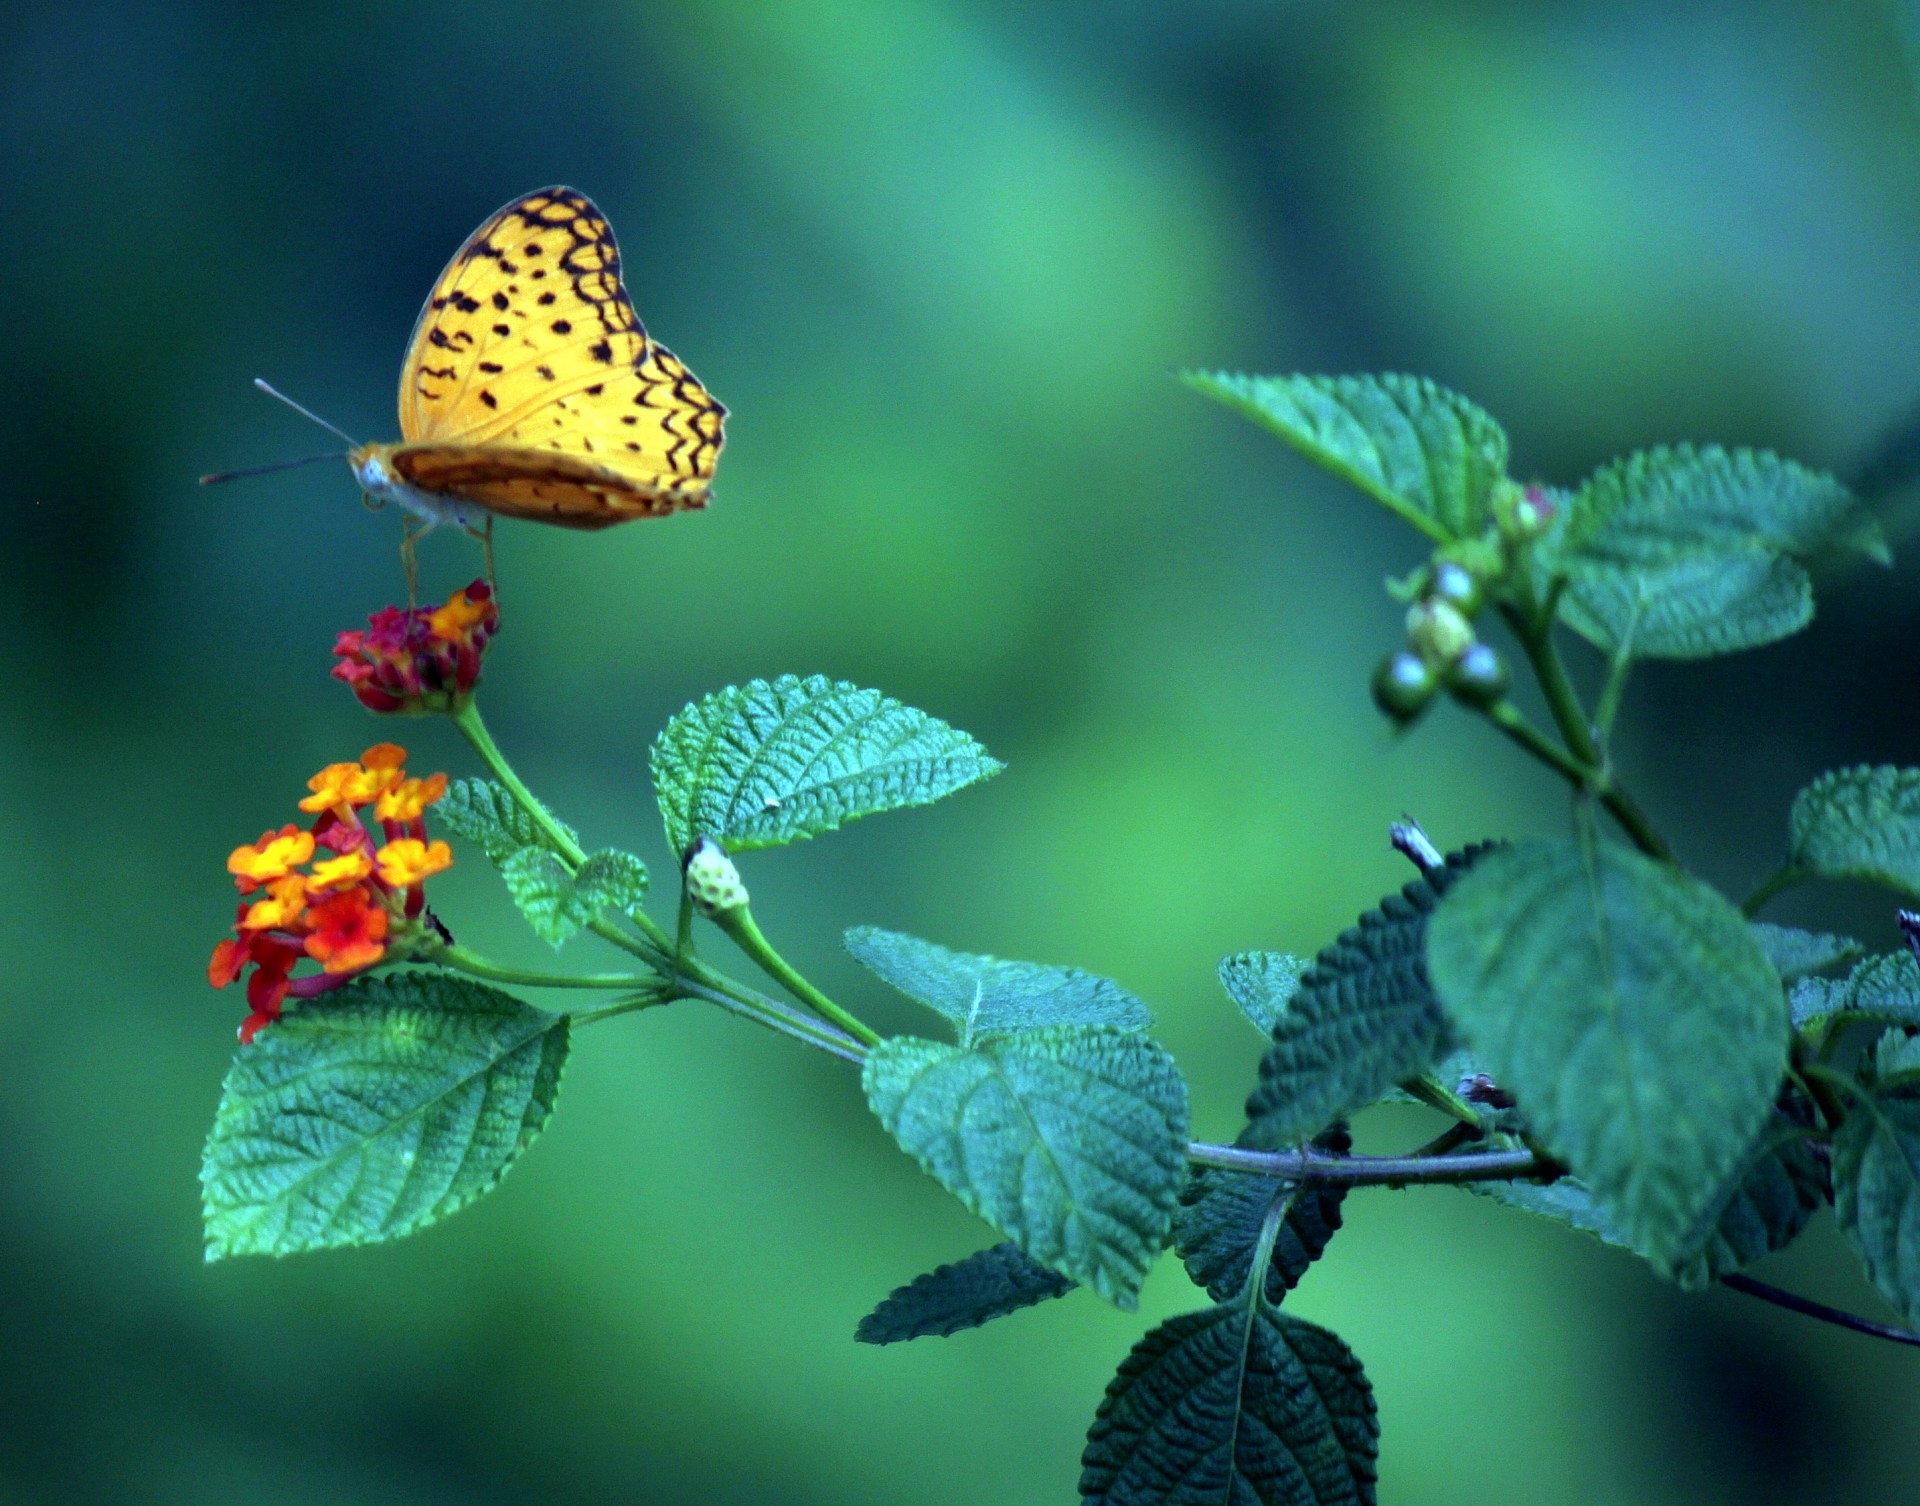 Yellow Butterfly On The Flower